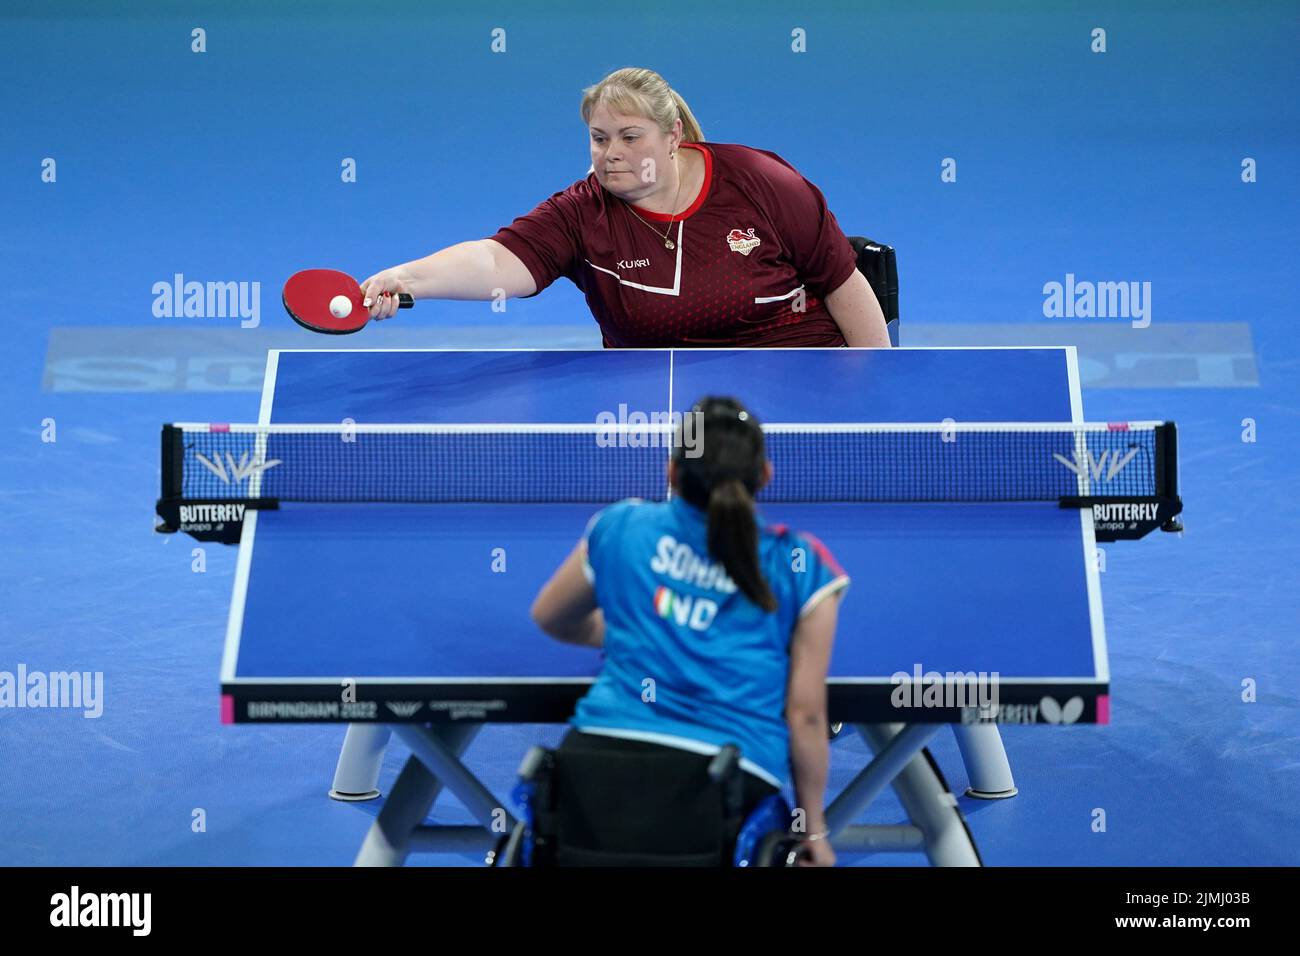 England's Sue Bailey plays a shot against India's Sonalben Manubhai during Women's Singles Classes 3-5 - Bronze Medal Match at The NEC on day nine of the 2022 Commonwealth Games in Birmingham. Picture date: Saturday August 6, 2022. Stock Photo